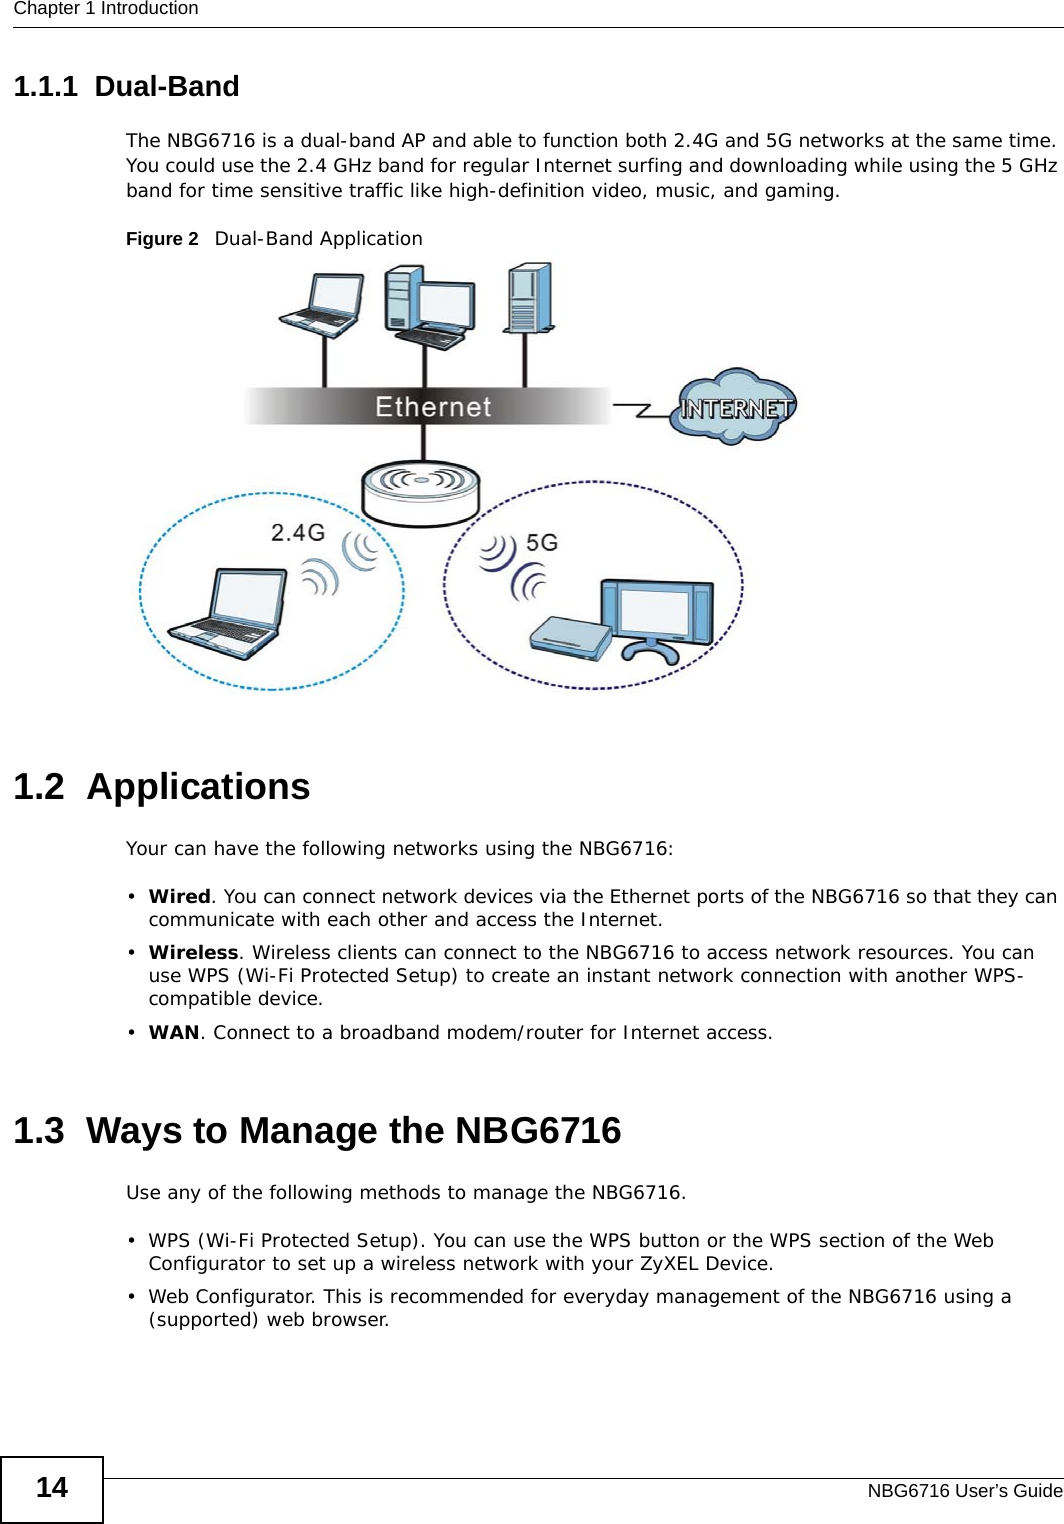 Chapter 1 IntroductionNBG6716 User’s Guide141.1.1  Dual-BandThe NBG6716 is a dual-band AP and able to function both 2.4G and 5G networks at the same time. You could use the 2.4 GHz band for regular Internet surfing and downloading while using the 5 GHz band for time sensitive traffic like high-definition video, music, and gaming. Figure 2   Dual-Band Application 1.2  ApplicationsYour can have the following networks using the NBG6716:•Wired. You can connect network devices via the Ethernet ports of the NBG6716 so that they can communicate with each other and access the Internet.•Wireless. Wireless clients can connect to the NBG6716 to access network resources. You can use WPS (Wi-Fi Protected Setup) to create an instant network connection with another WPS-compatible device.•WAN. Connect to a broadband modem/router for Internet access.1.3  Ways to Manage the NBG6716Use any of the following methods to manage the NBG6716.• WPS (Wi-Fi Protected Setup). You can use the WPS button or the WPS section of the Web Configurator to set up a wireless network with your ZyXEL Device.• Web Configurator. This is recommended for everyday management of the NBG6716 using a (supported) web browser.